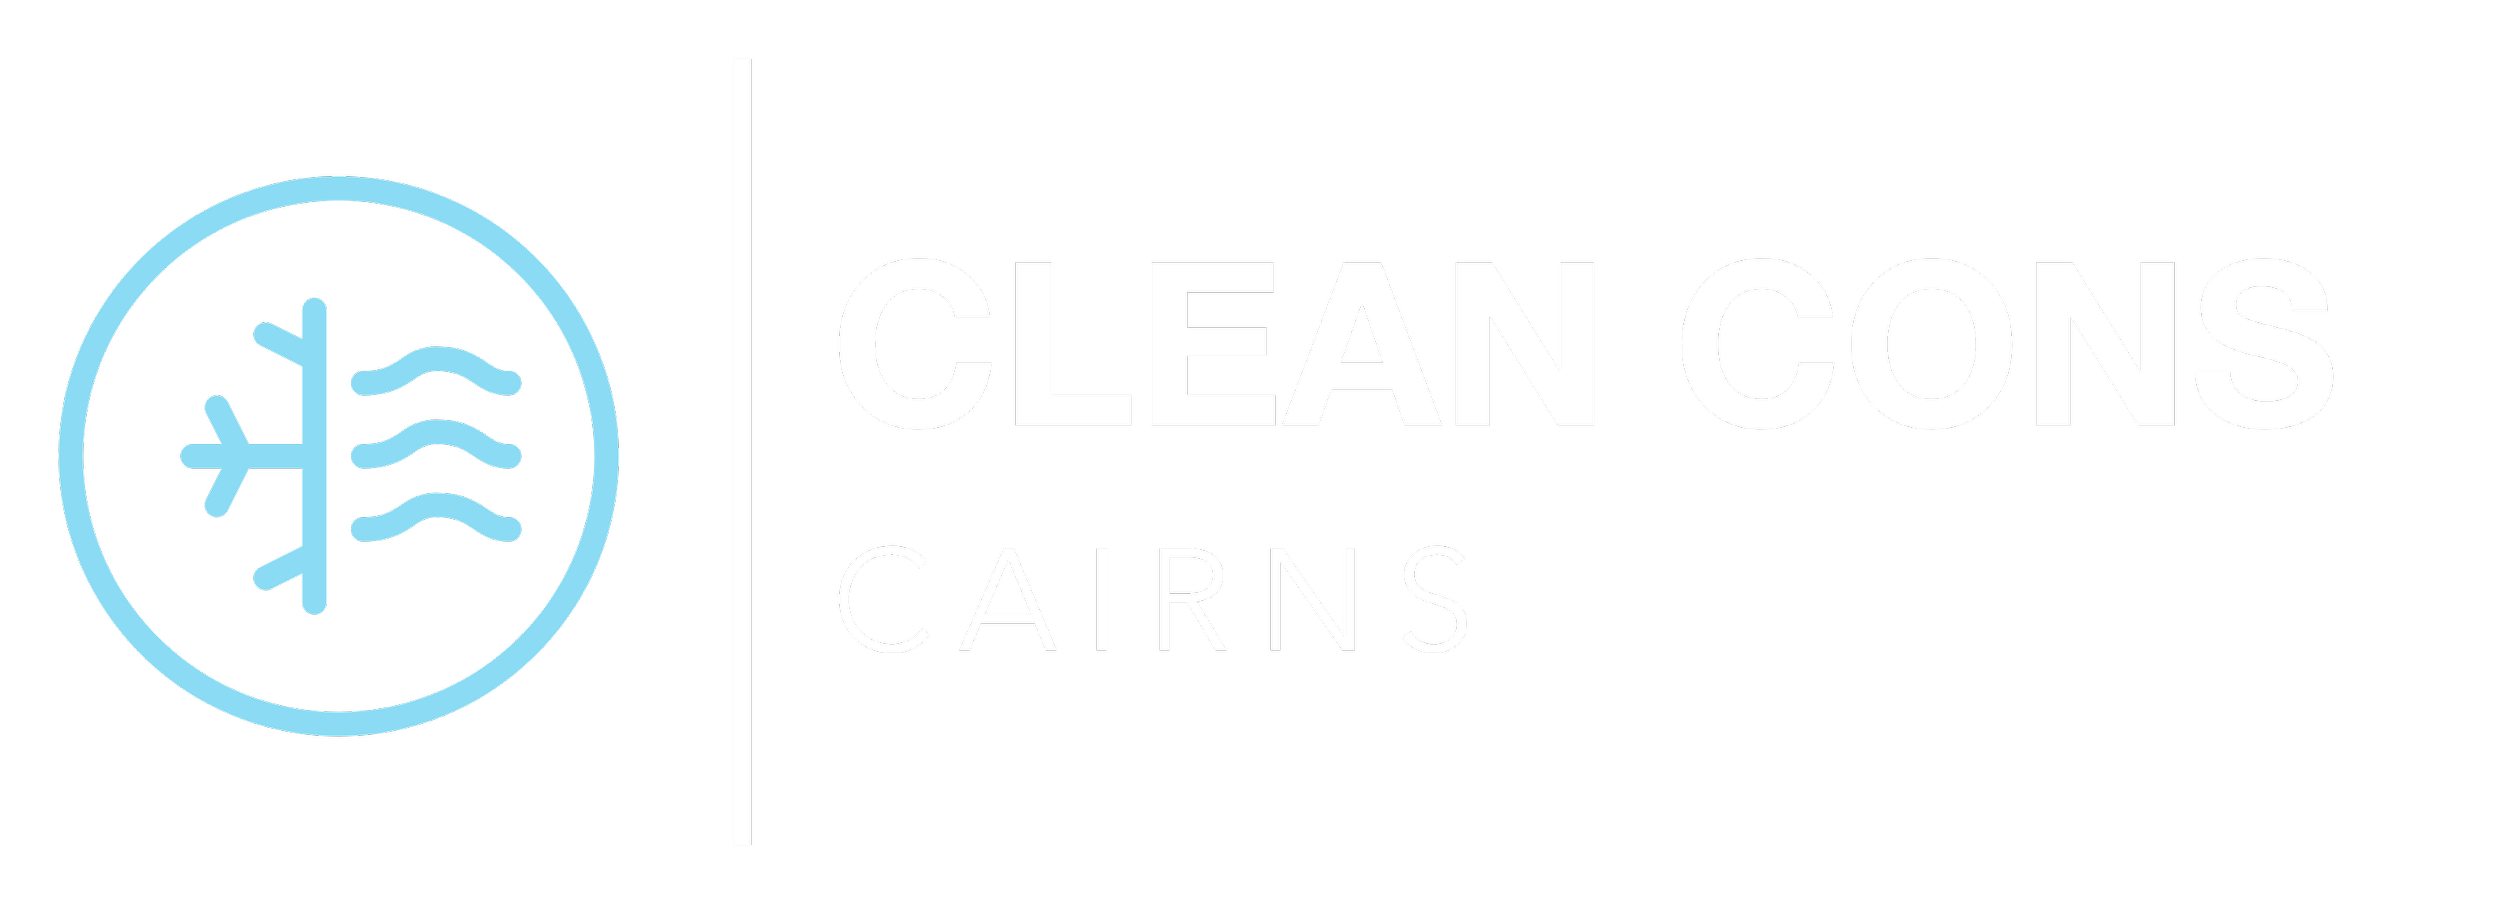 Clean Cons Cairns